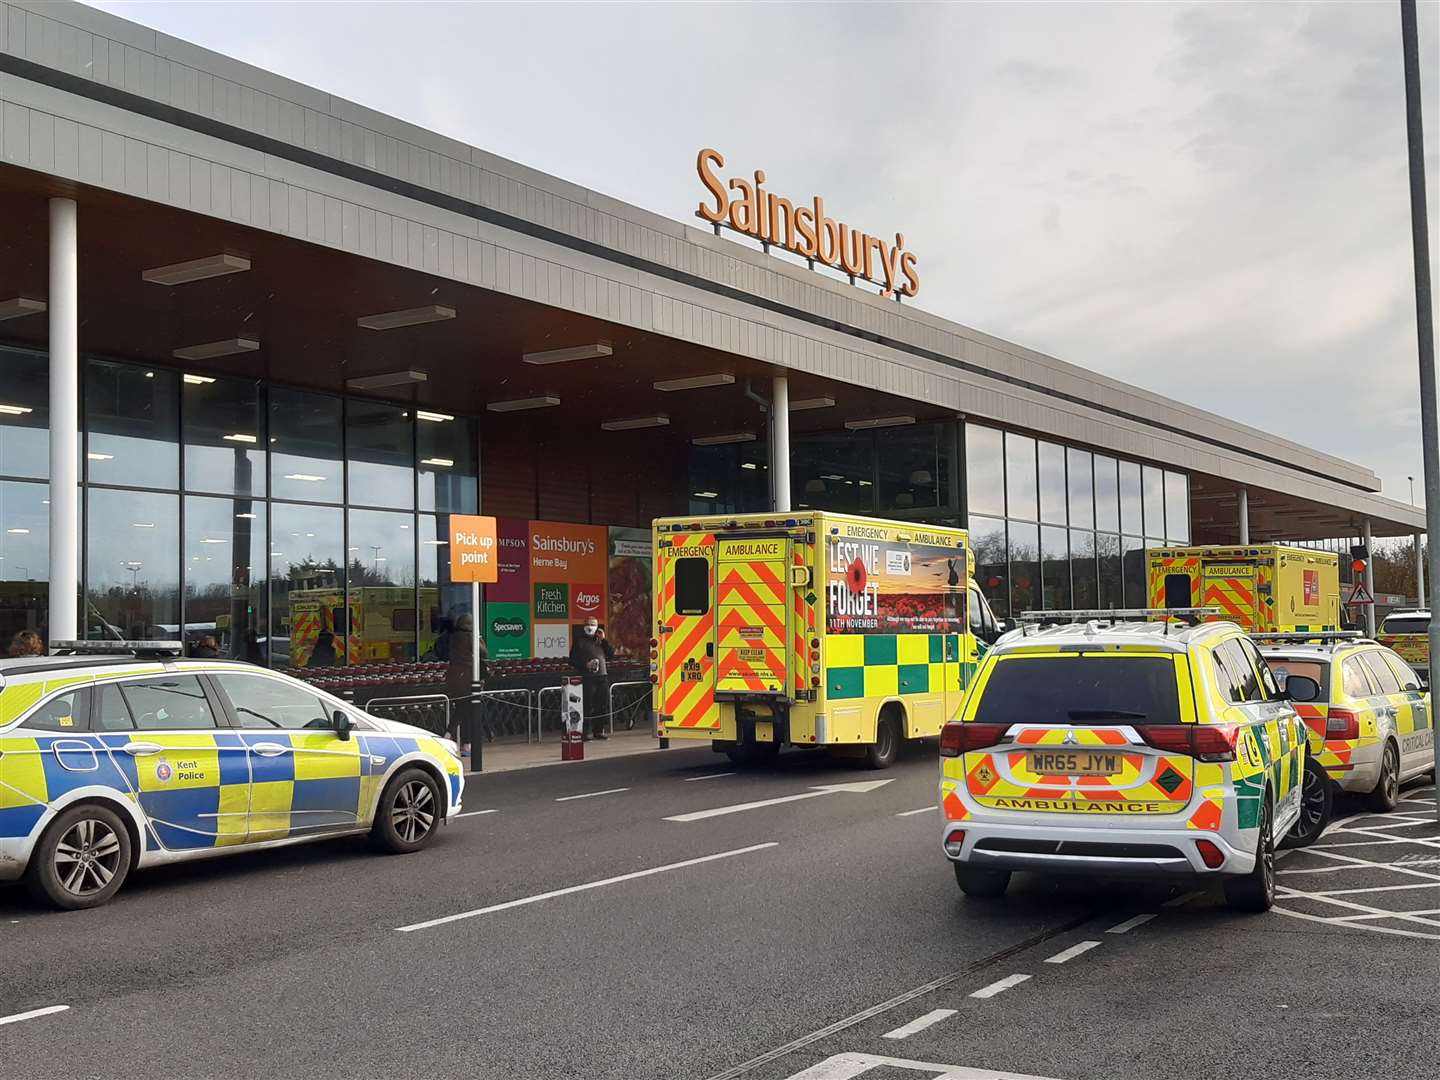 Emergency services were called to Sainsbury's in Herne Bay this afternoon